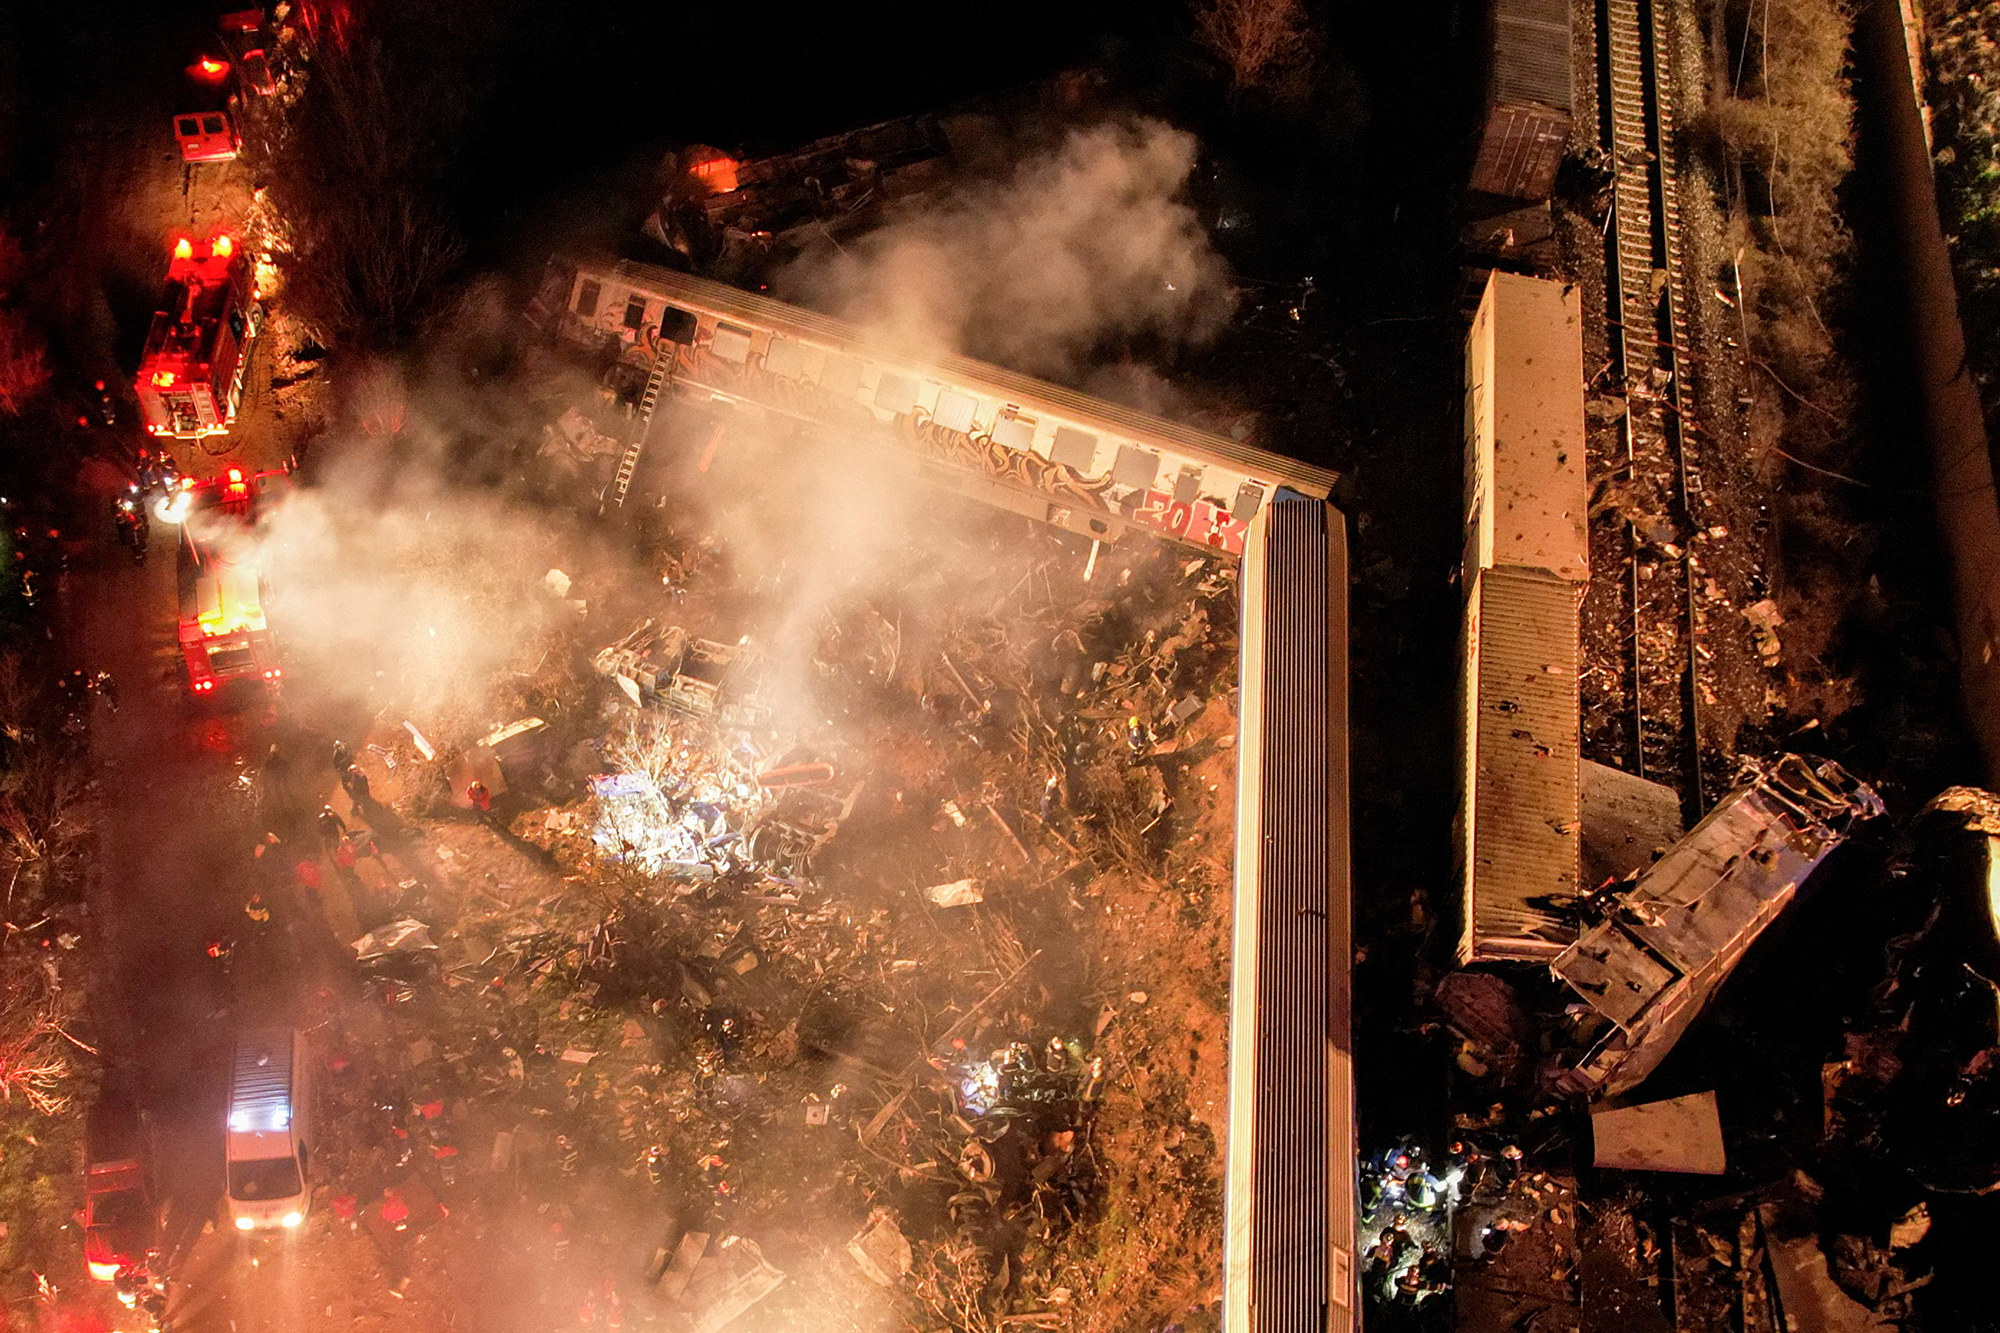 An aerial view at night of derailed freight and passenger train cars, amid debris, smoke, emergency vehicles, and fire trucks with their lights on